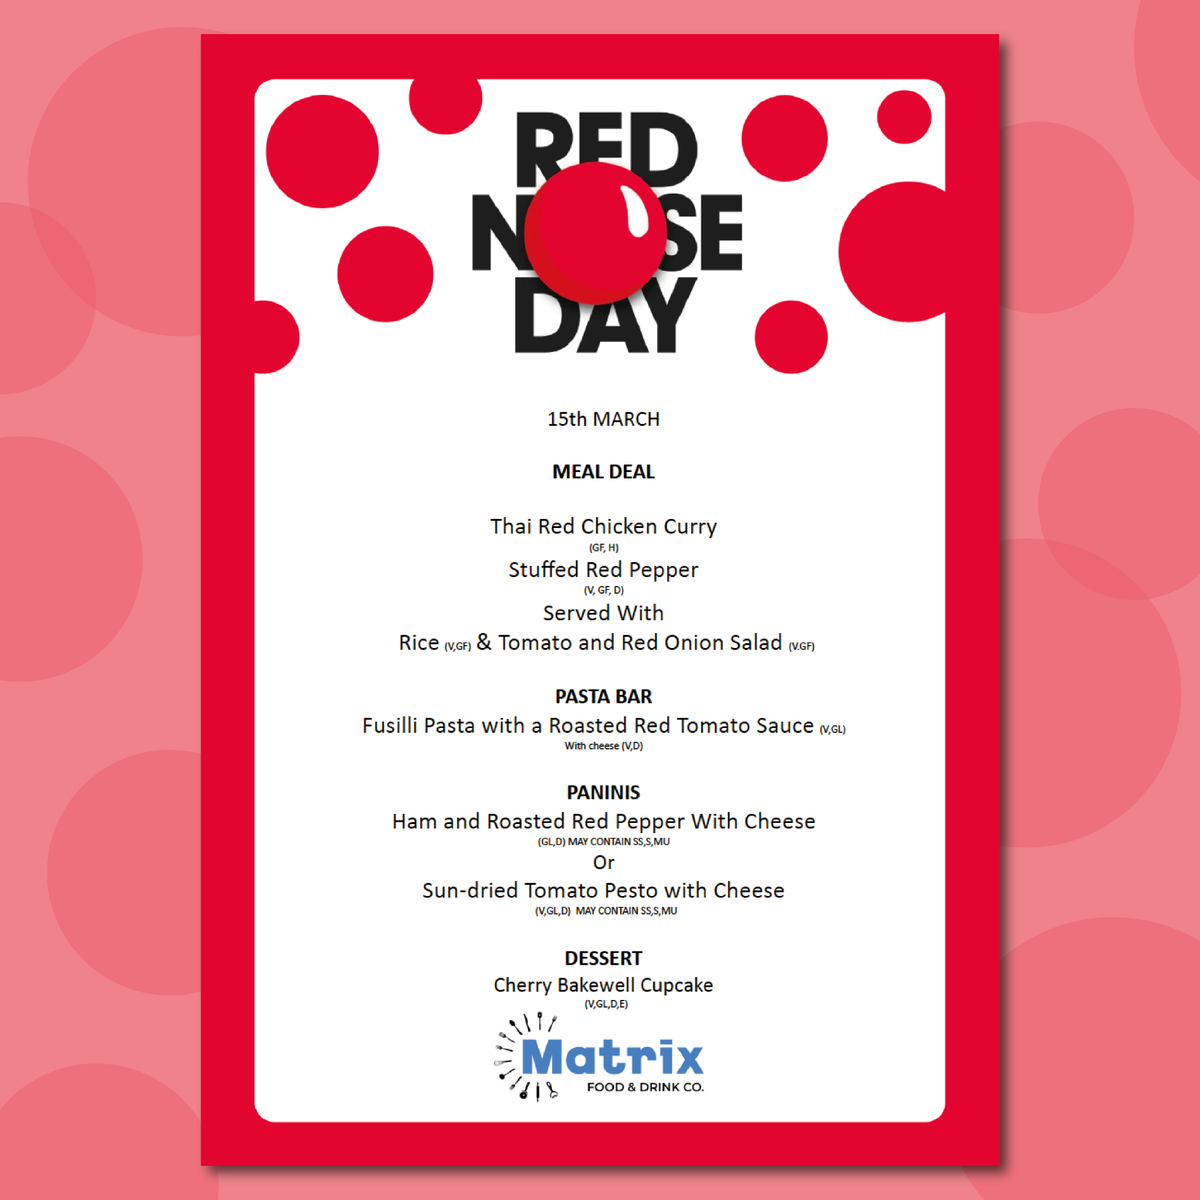 Enjoy a tasty selection of red-themed meals at lunchtime on Friday in support of Red Nose Day🔴🍽️ #RedNoseDay2024 #ComicRelief